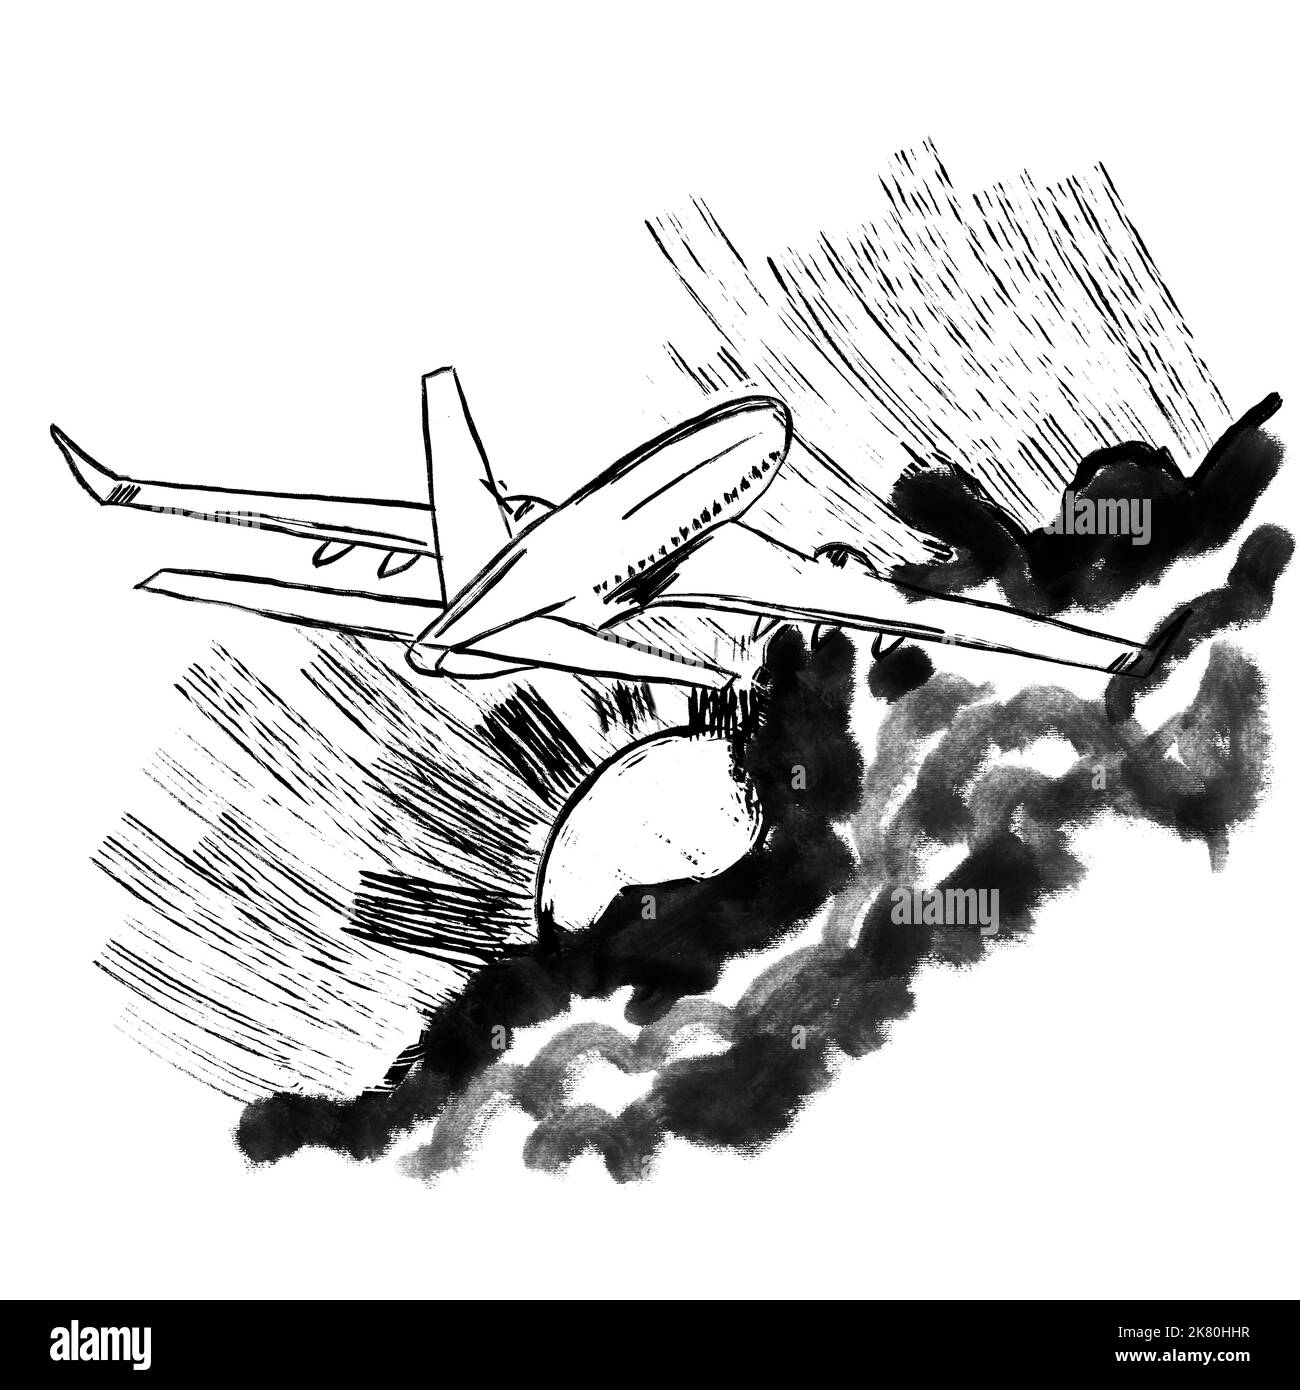 Hand drawn illustration of air plane airplane aircraft in sky clouds sun. Flight flying transport, black line minimalism design on white background, ink print, graphic drawing sketch Stock Photo